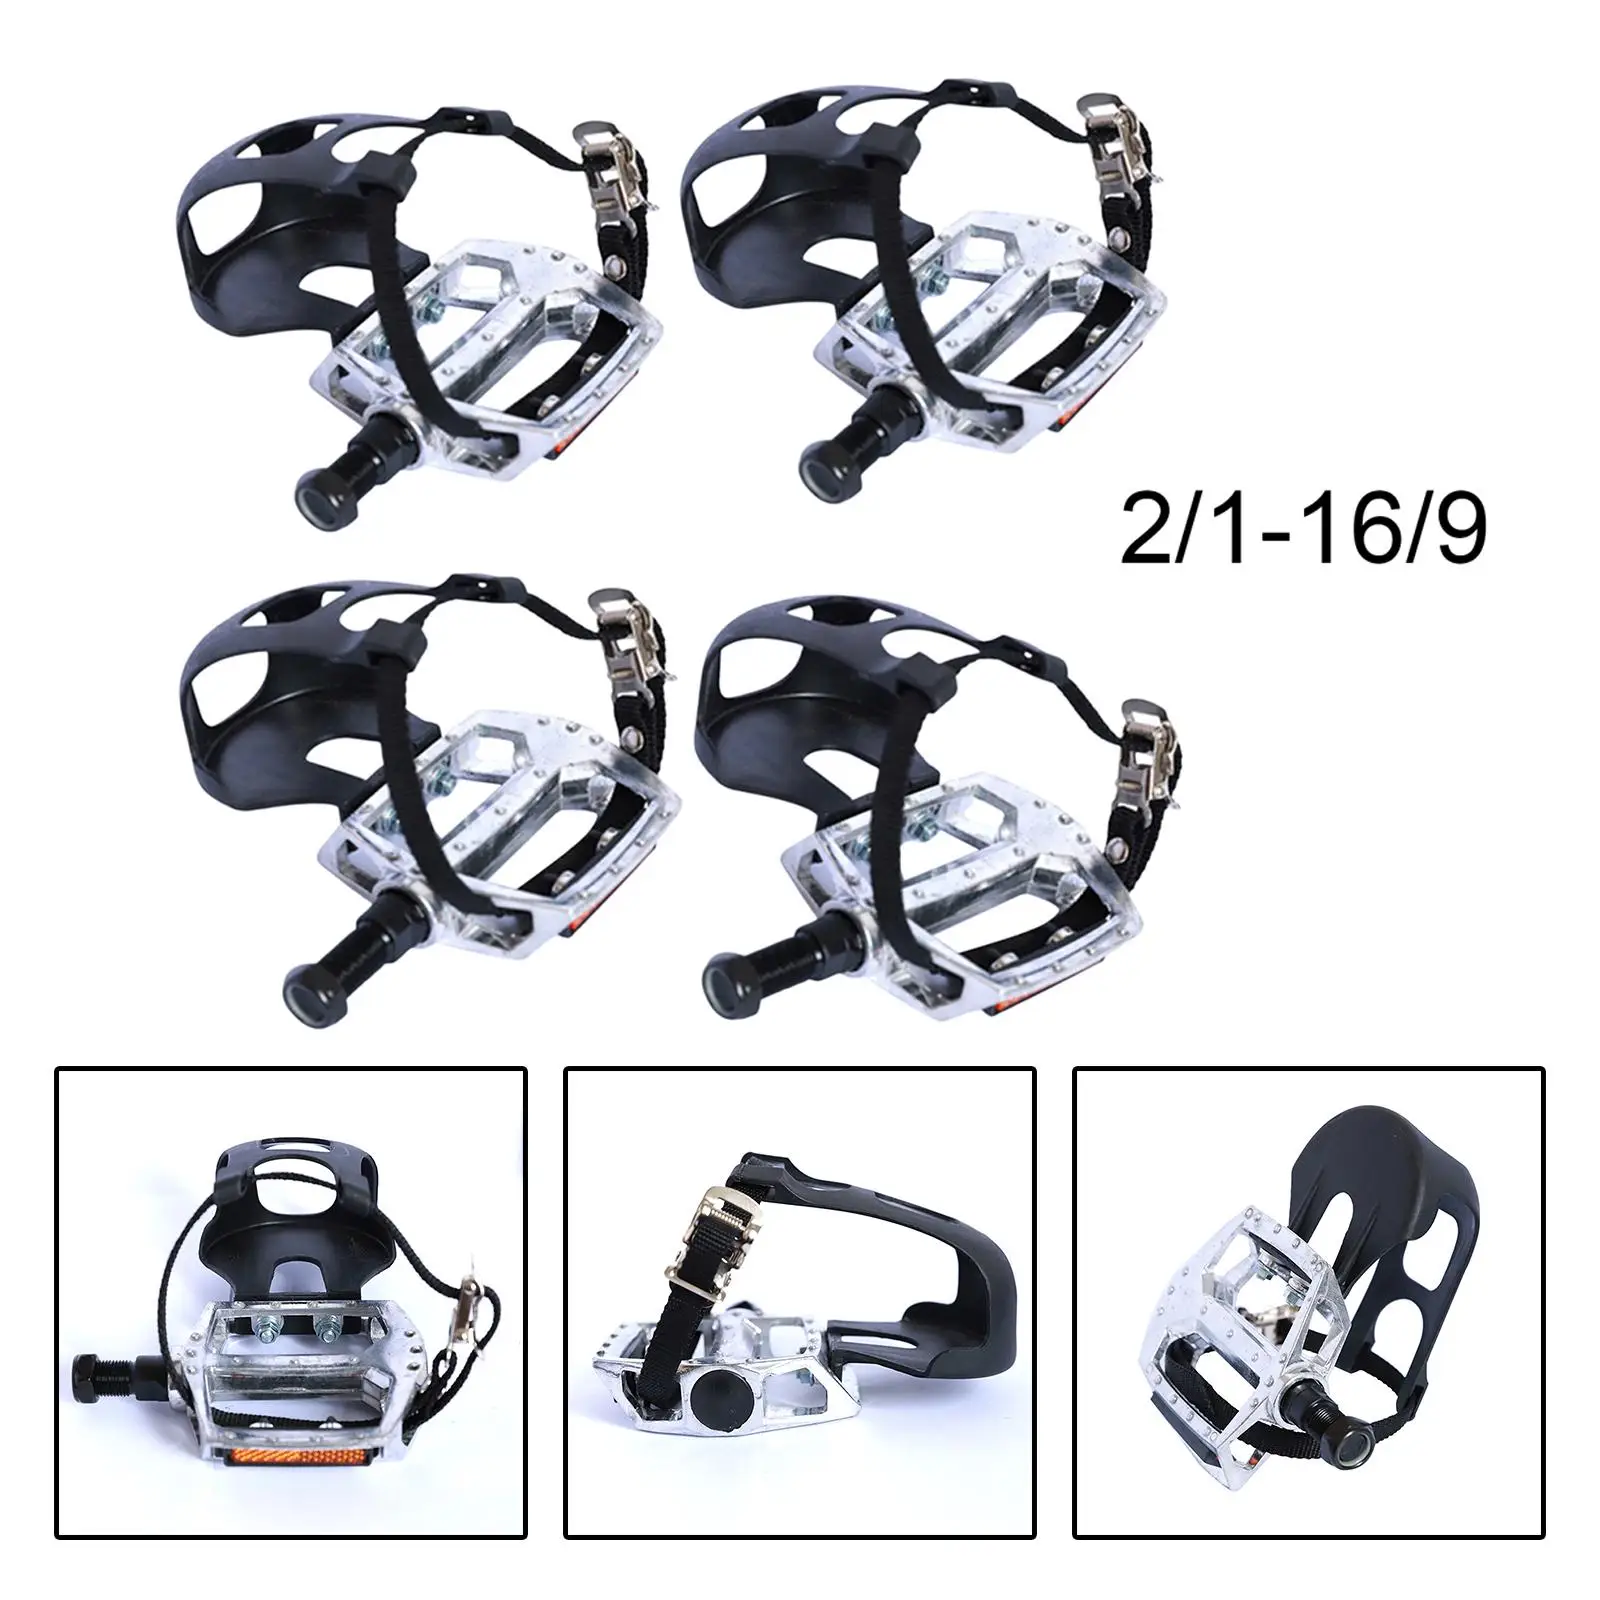 Bike Pedals with Toe Clip and Straps, for Exercise Bike, and Outdoor